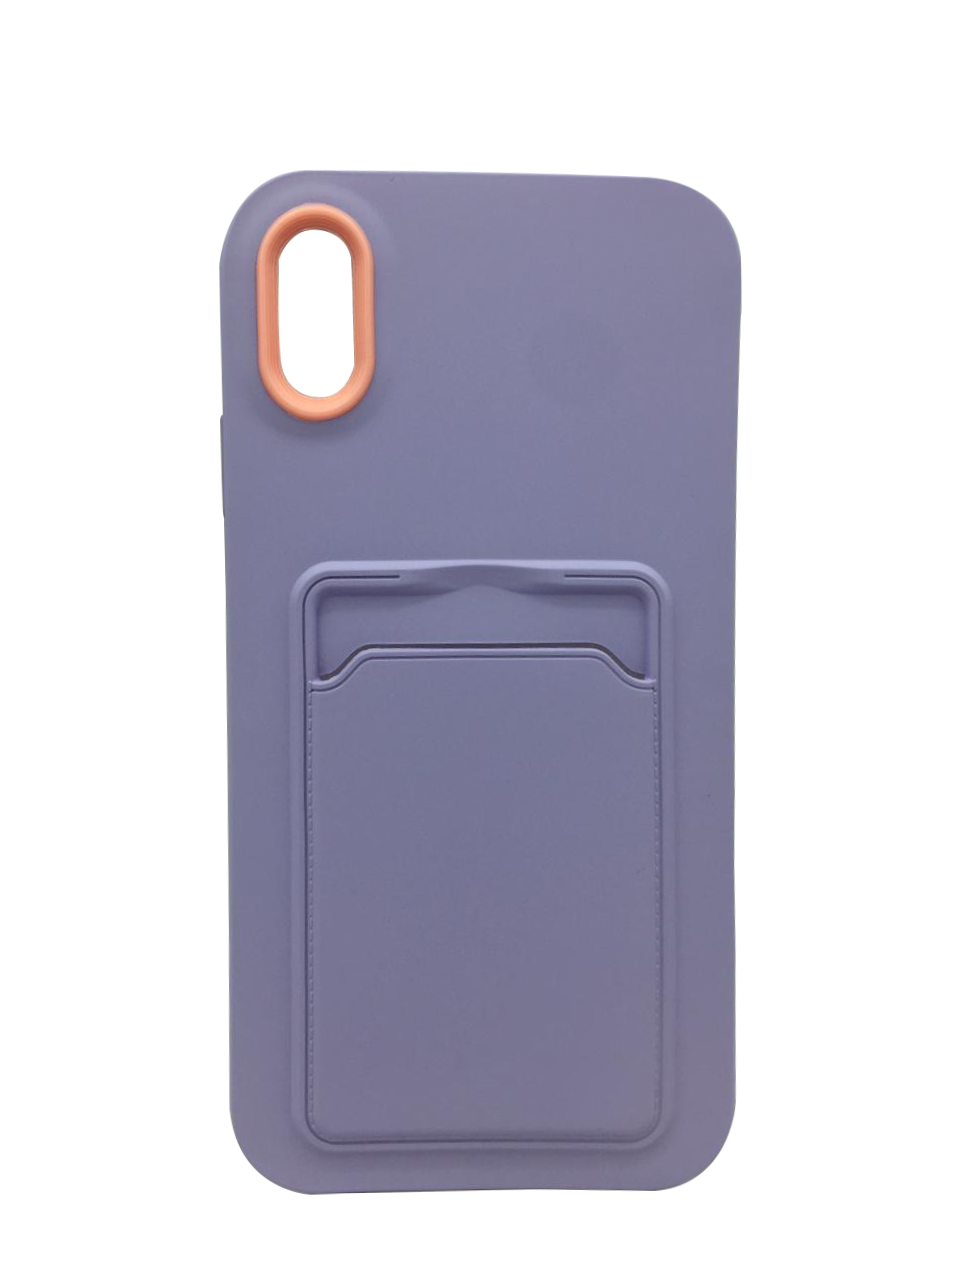 Silicone Case for iPHONE XS max